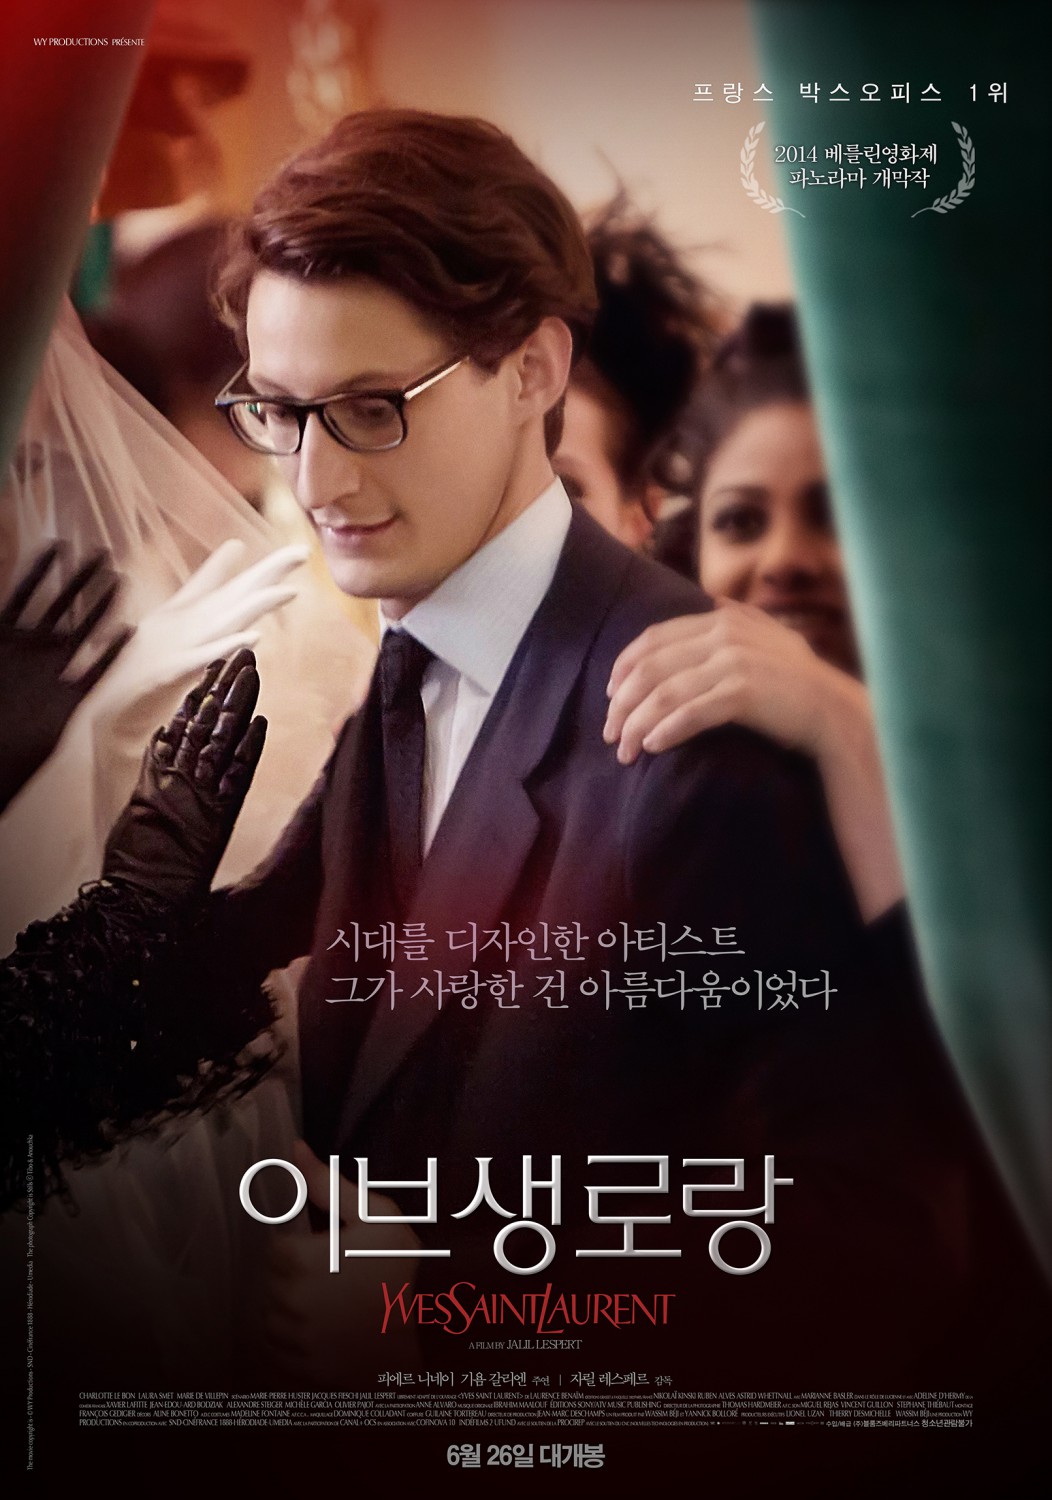 Extra Large Movie Poster Image for Yves Saint Laurent (#5 of 7)